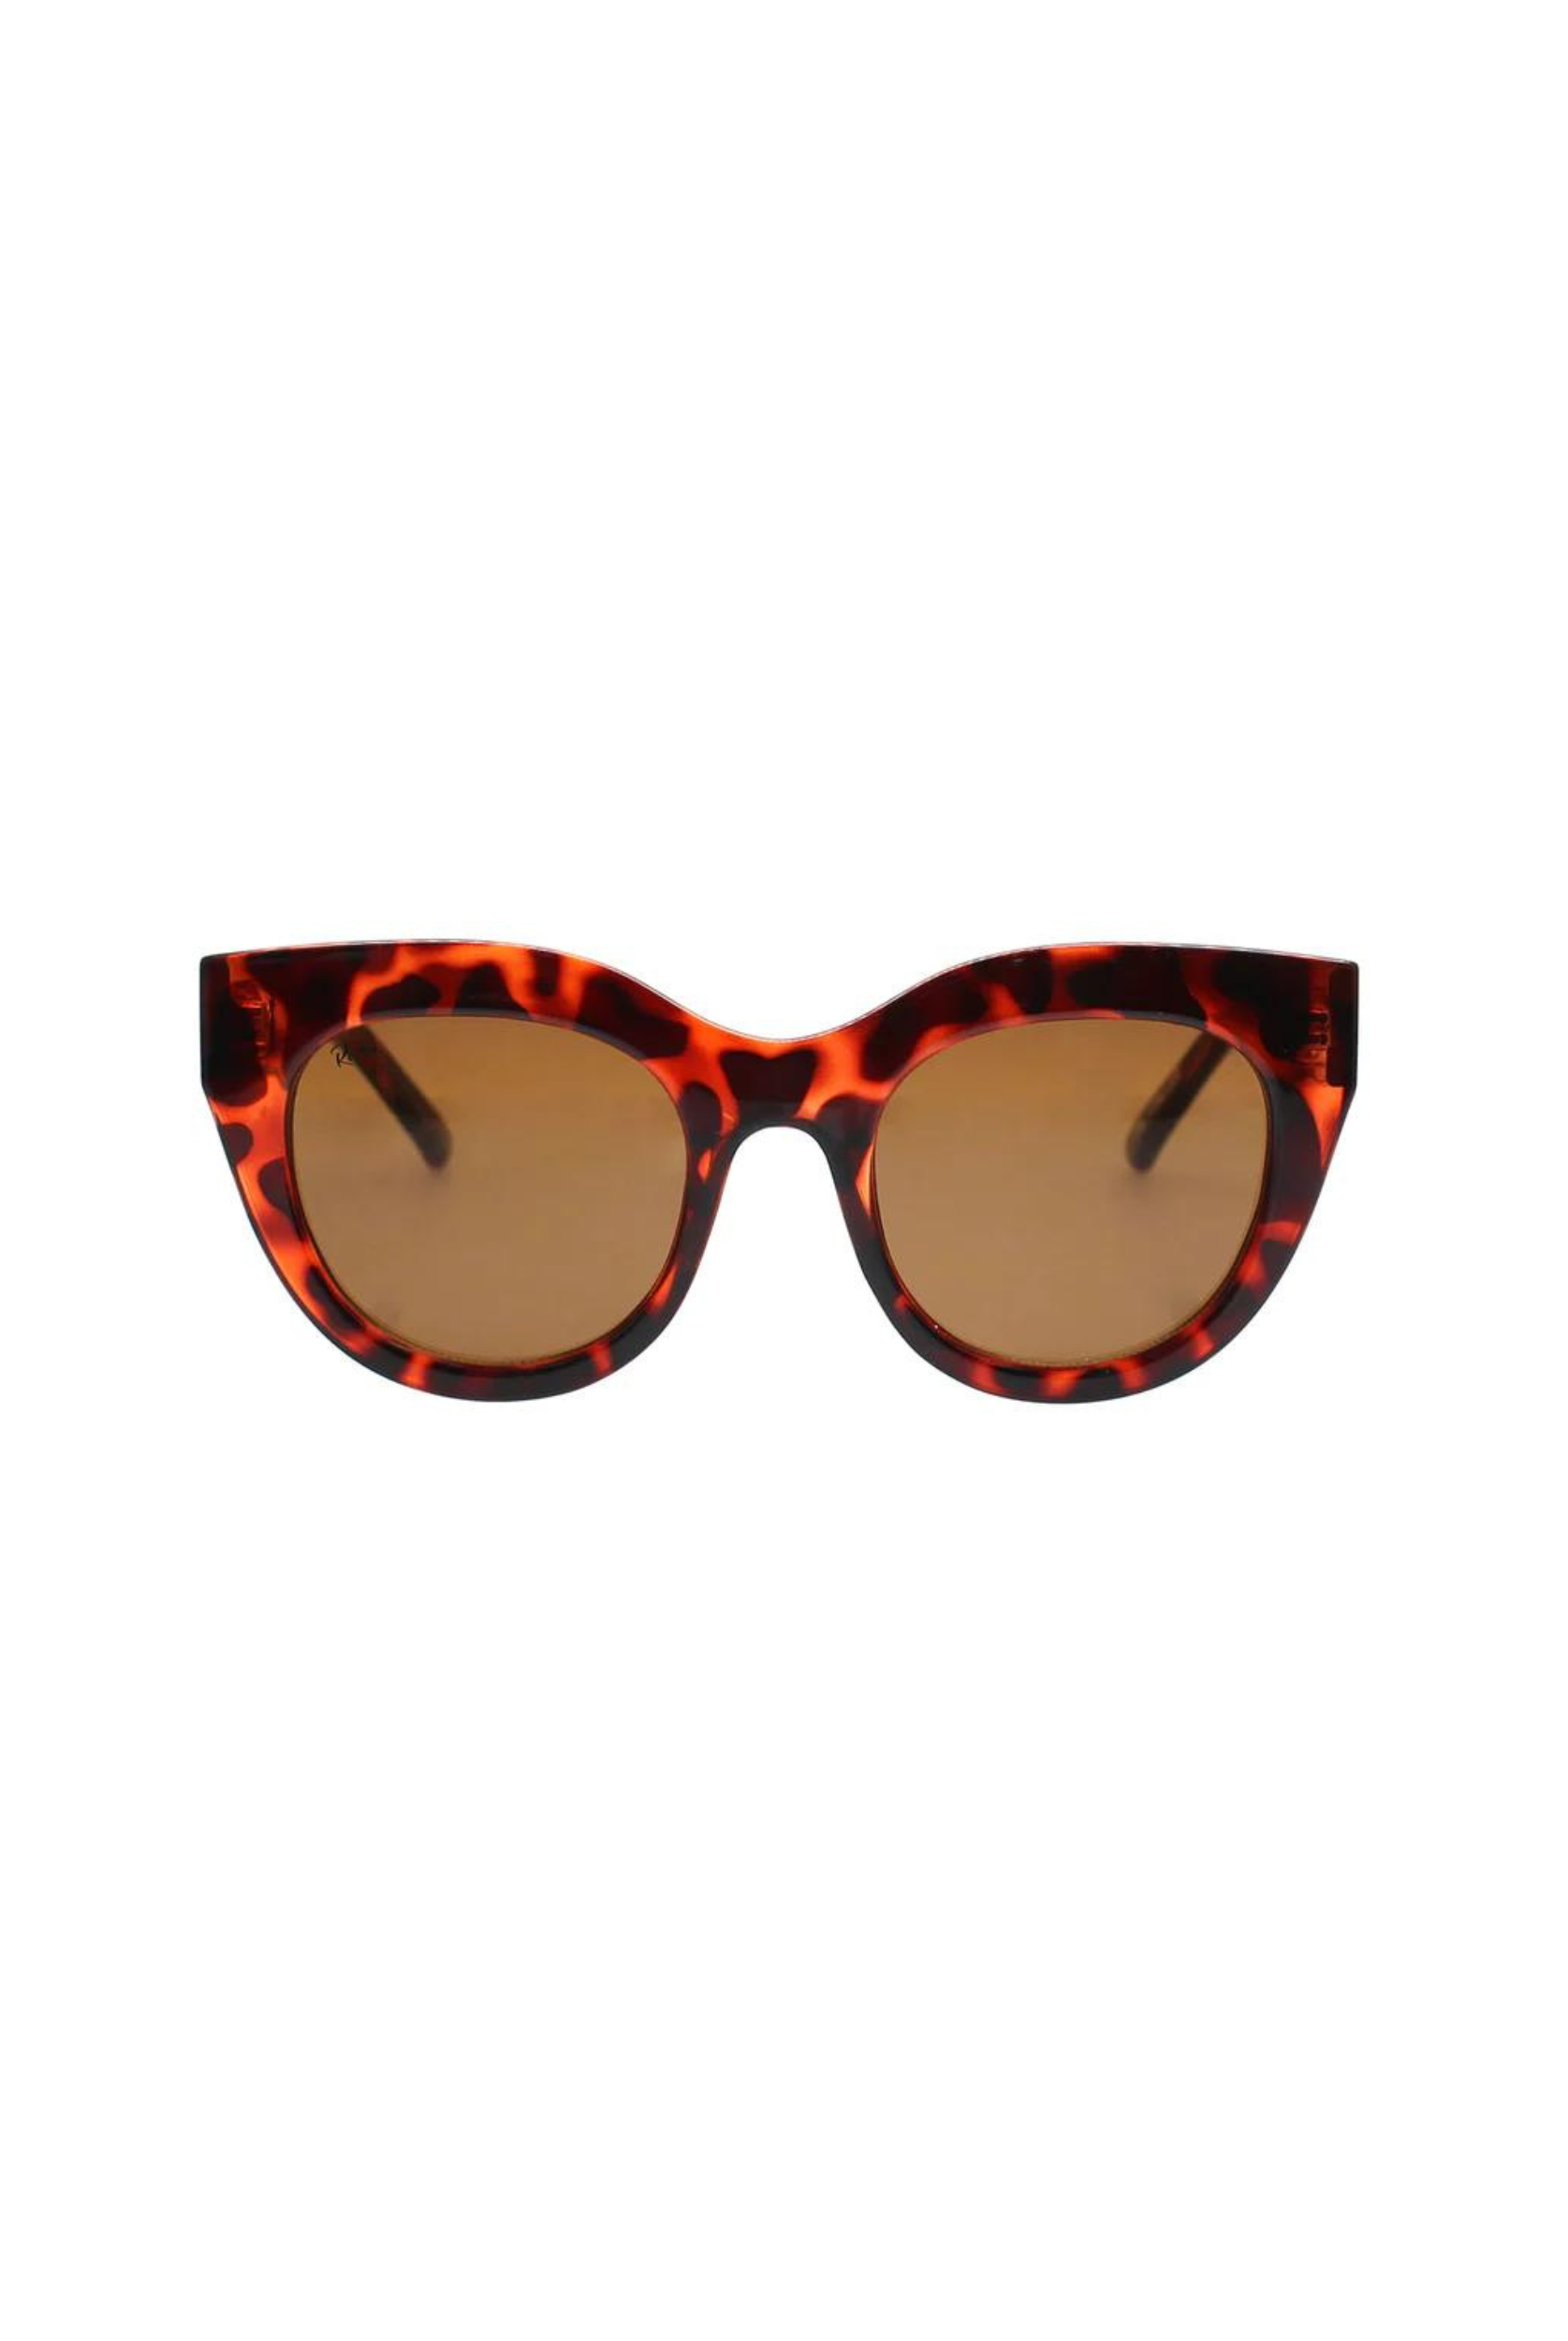 The Forever Turtle sunglasses from Reality Eyewear